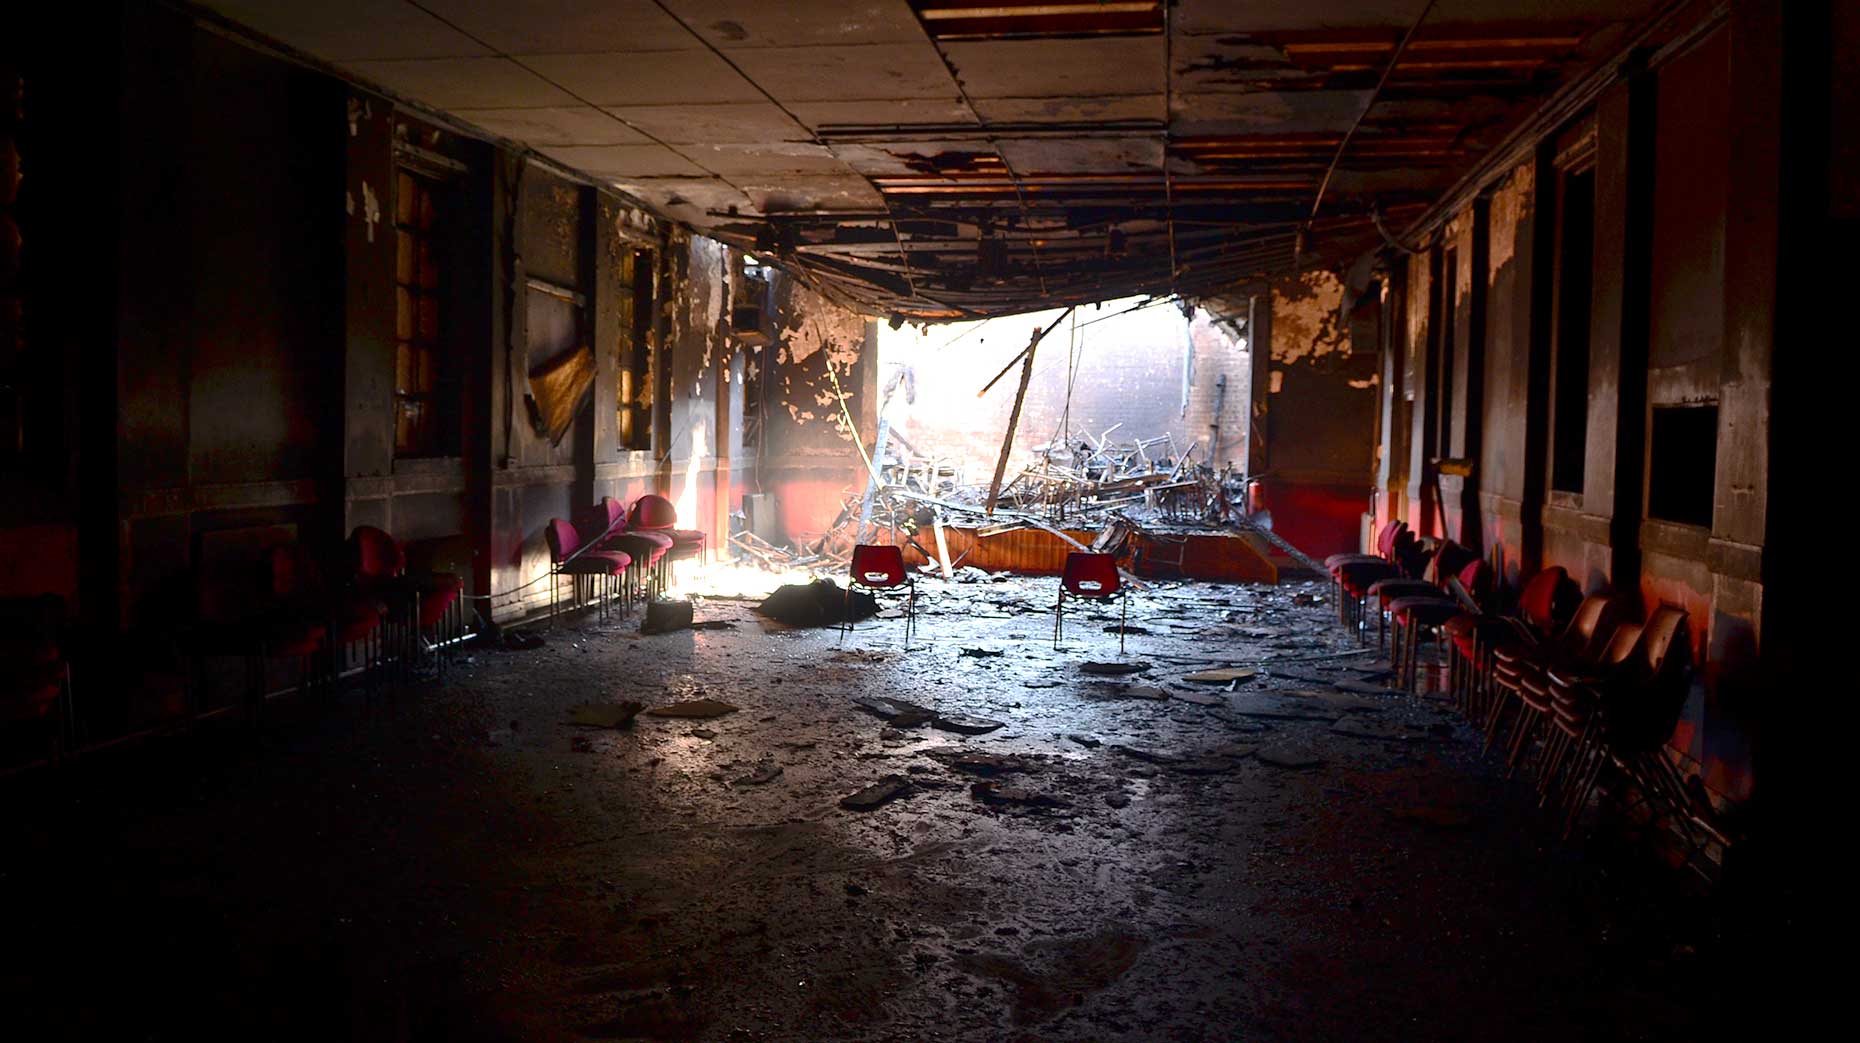 Fire damage at the Croft Street community centre in Lincoln. Photo: Steve Smailes for The Lincolnite